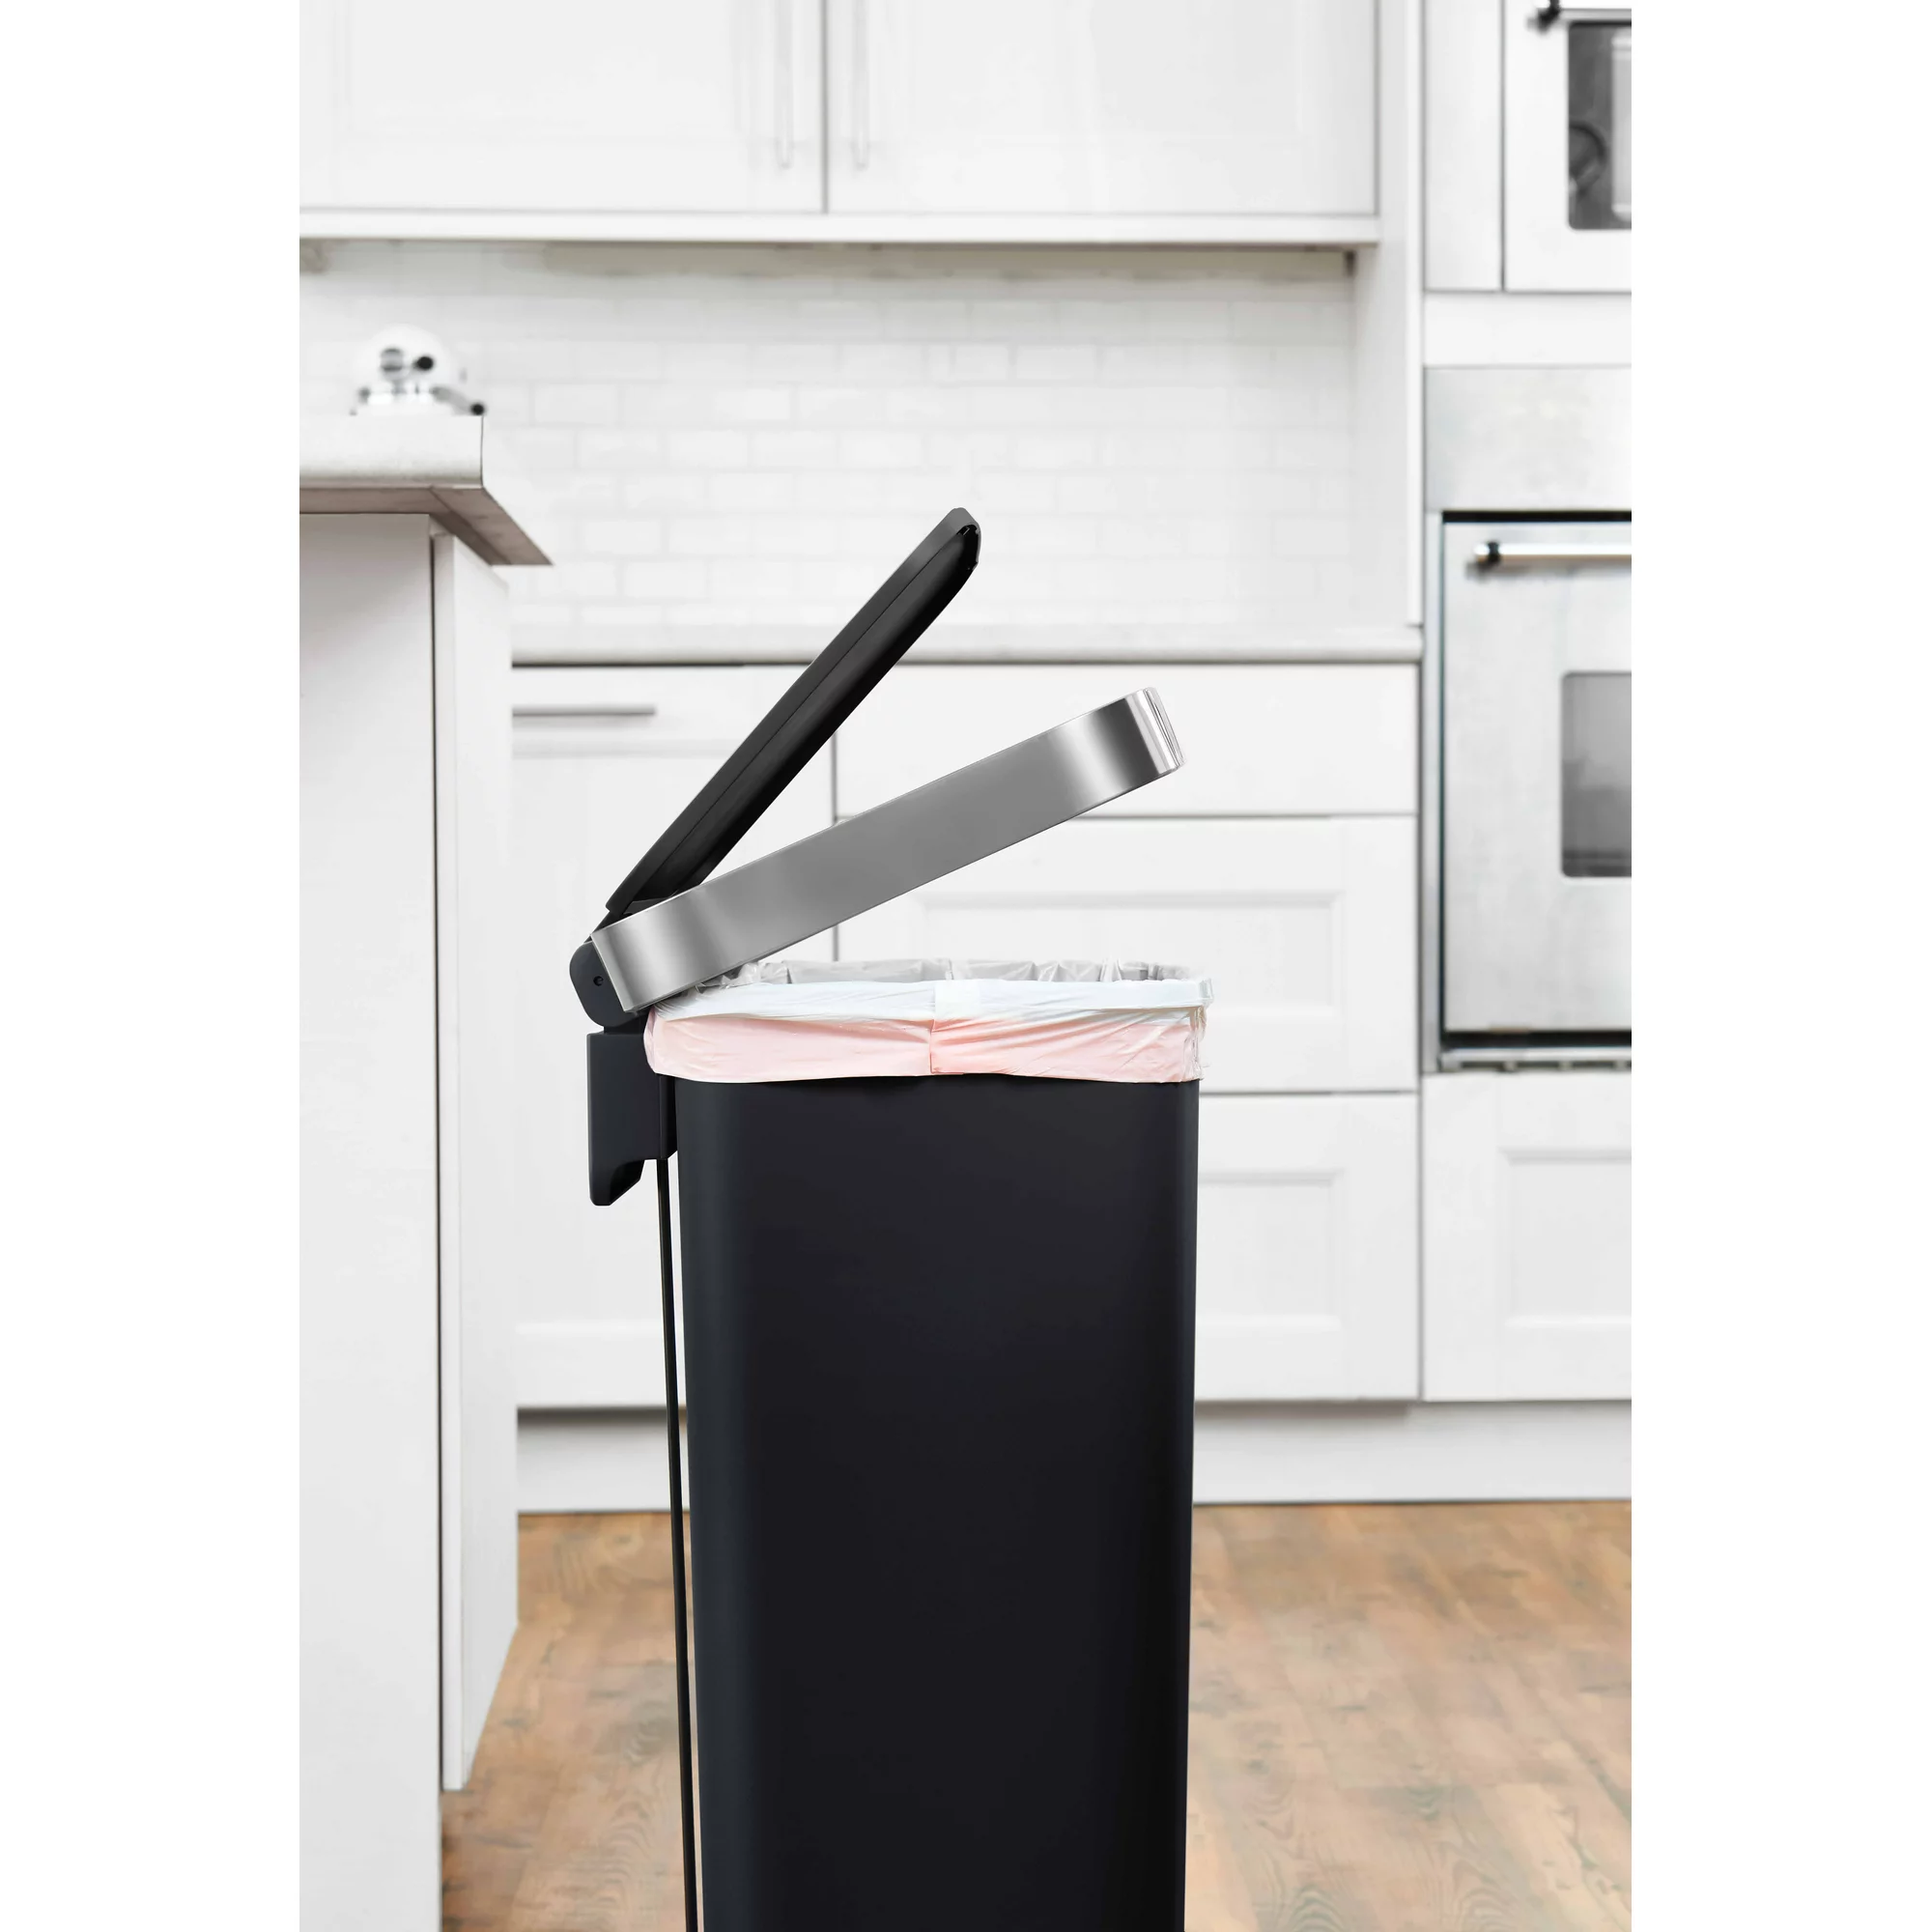 https://discounttoday.net/wp-content/uploads/2023/02/Better-Homes-Gardens-11.9-Gallon-Trash-Can-Plastic-Step-On-Kitchen-Trash-Can-Black-12.webp